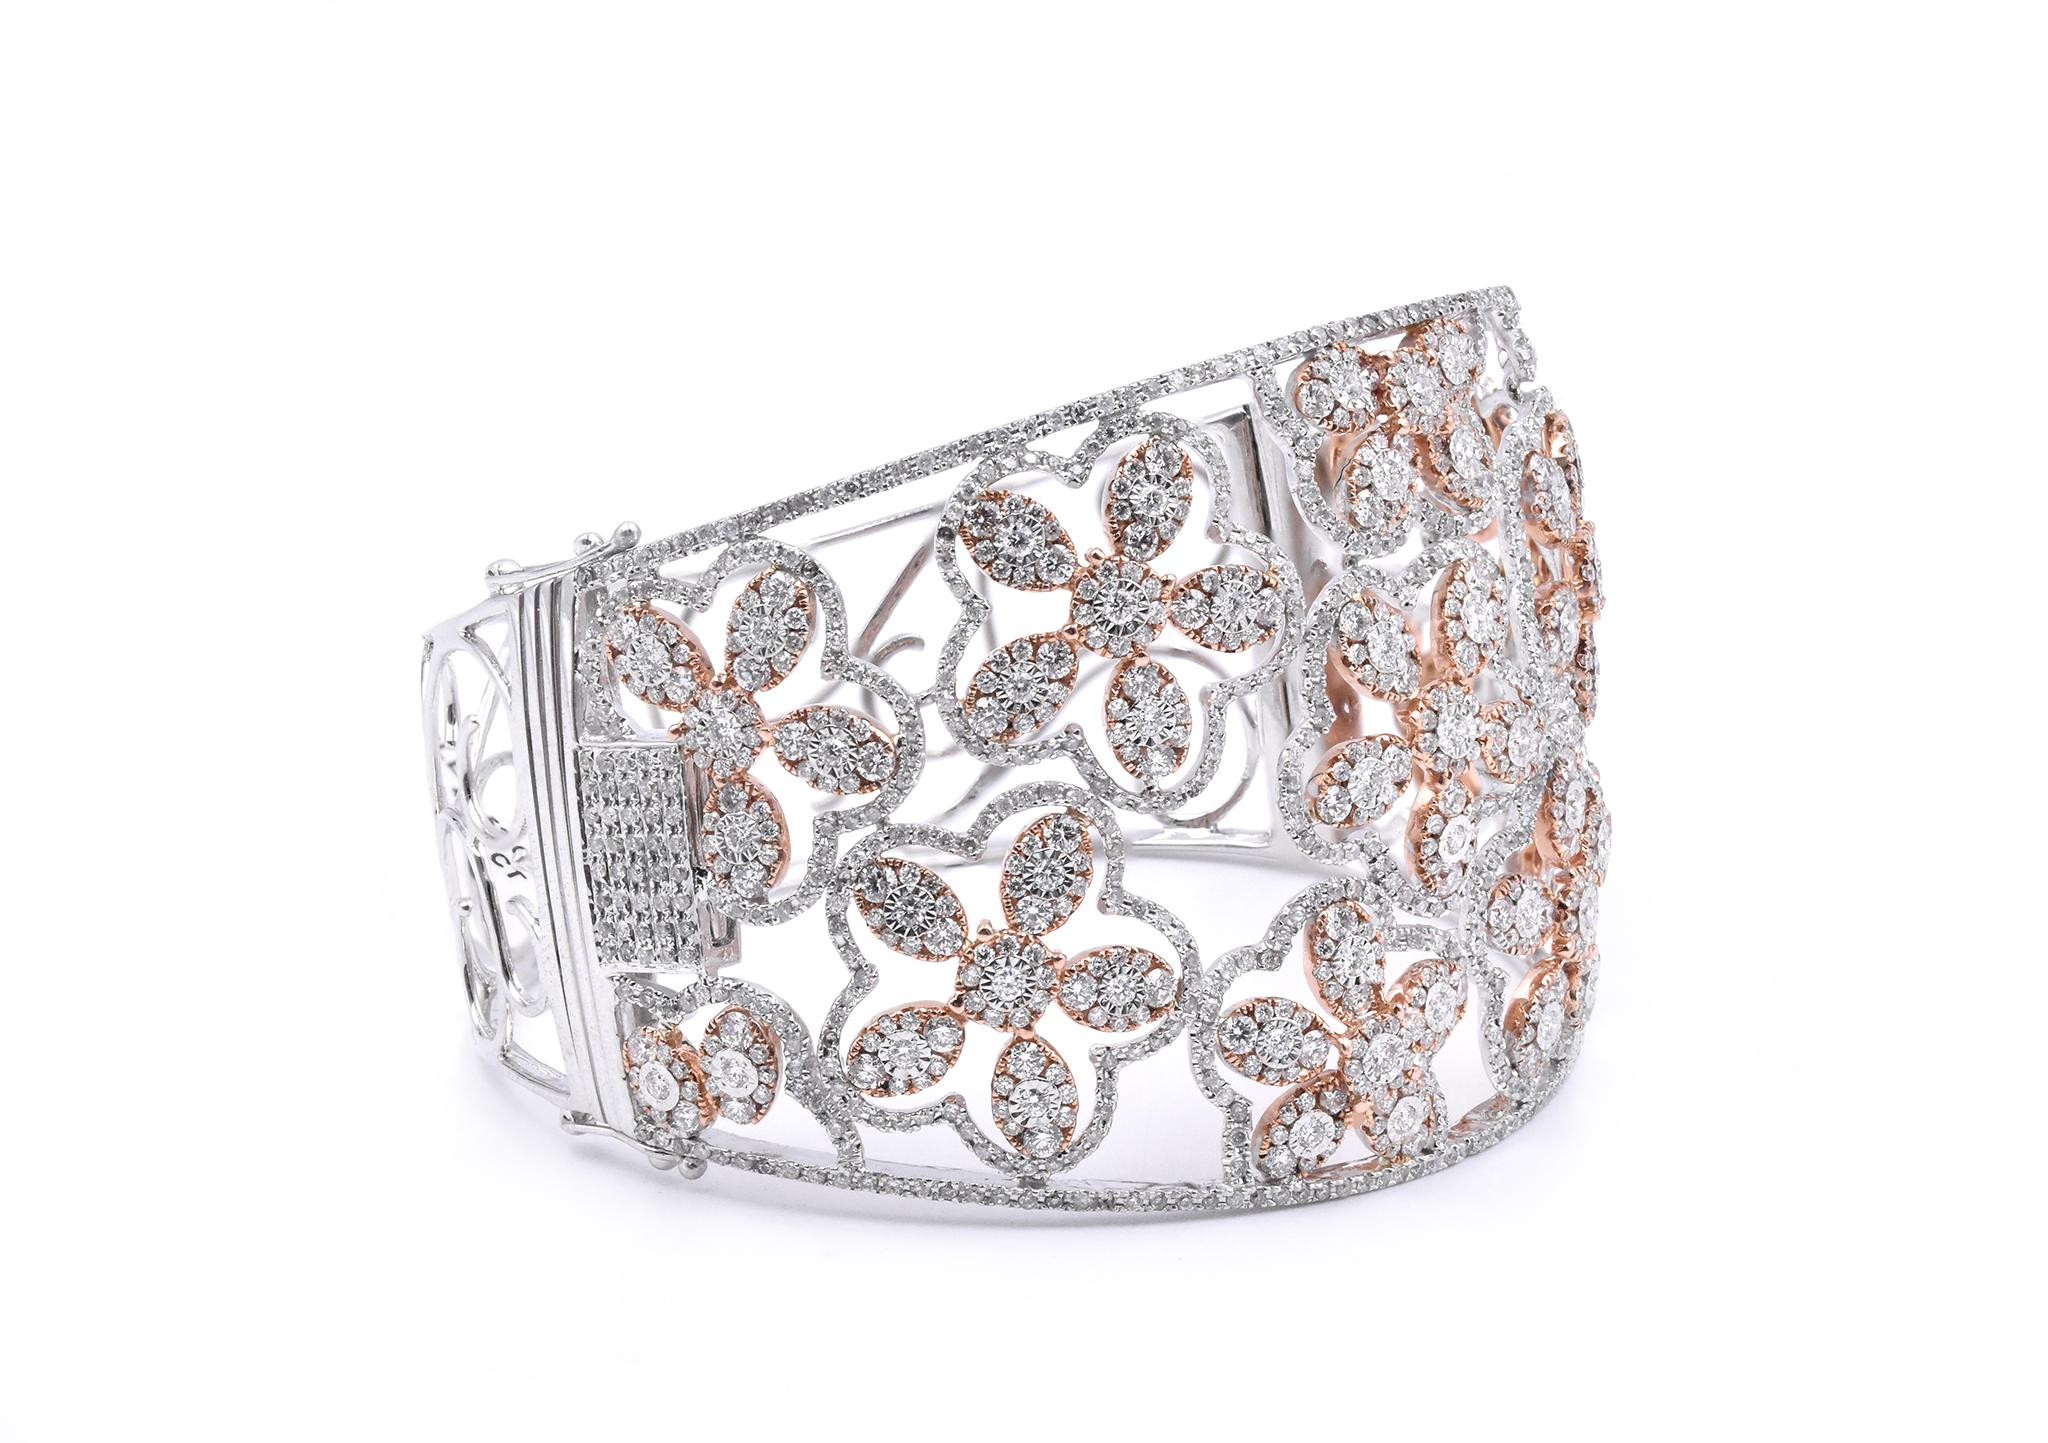 Material: 18K white and rose gold
Diamonds: 597 round cut = 7.95cttw
Color: G
Clarity: VS
Dimensions: bracelet will fit up to a 7-inch wrist
Weight: 47.60 grams
